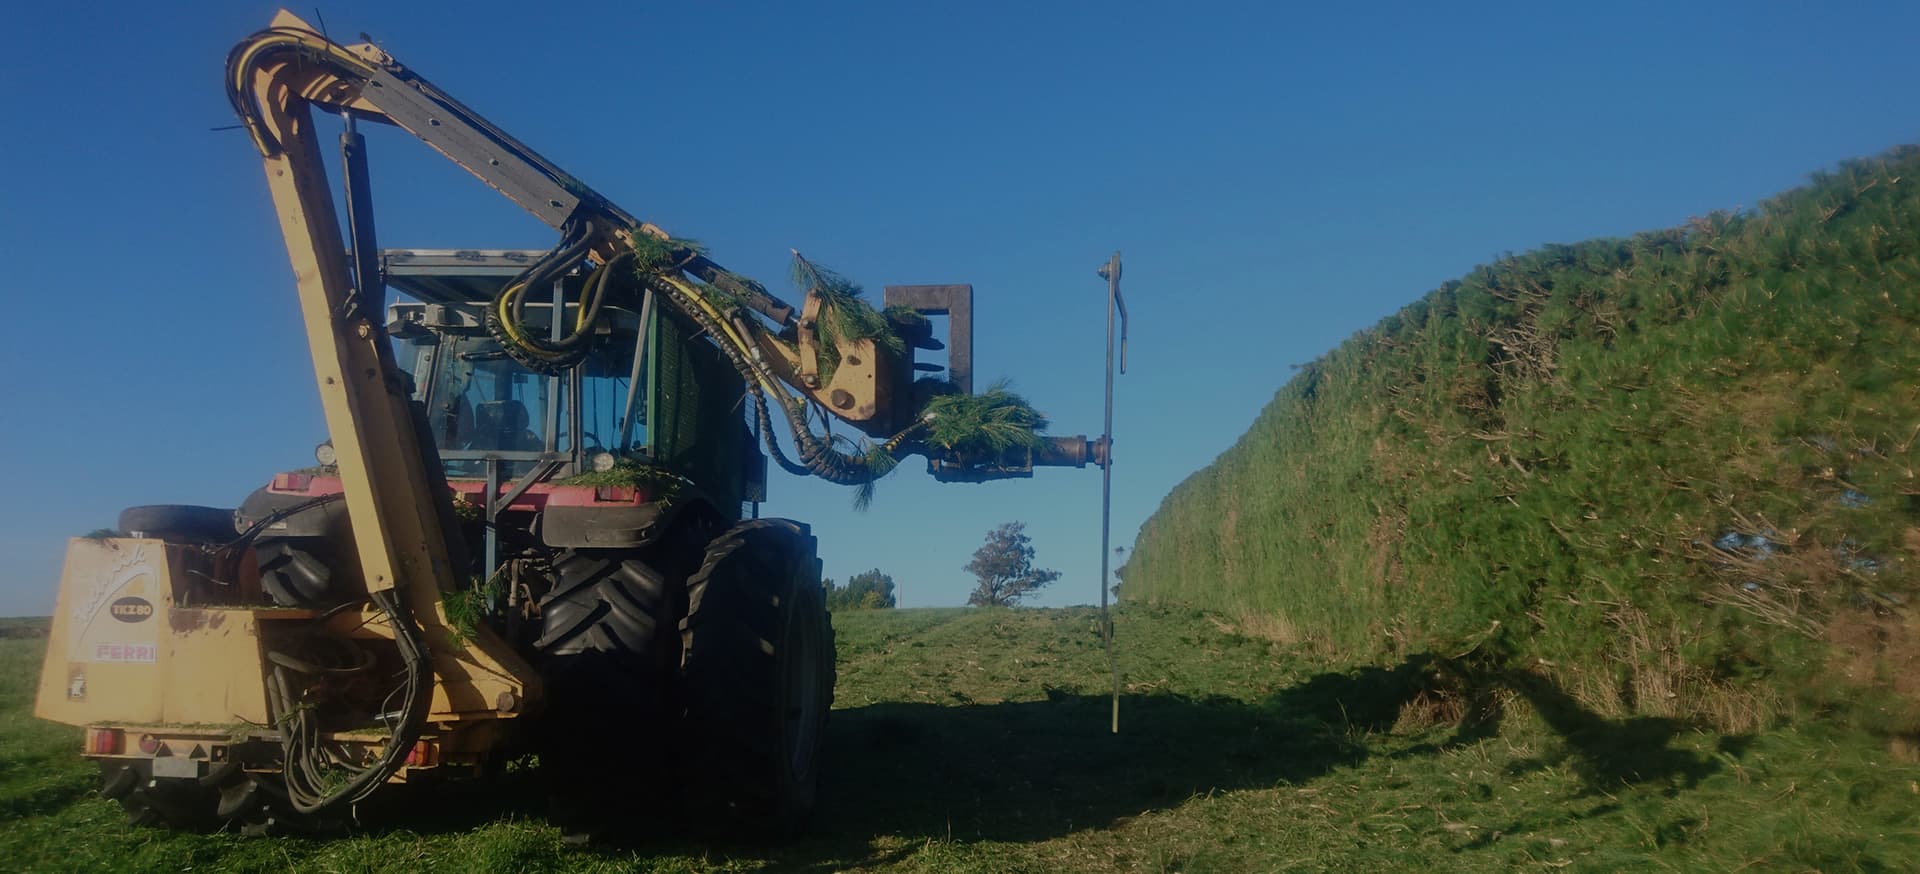 Southern Cultivation Ltd - Agricultural Contractor in Southland and South Otago